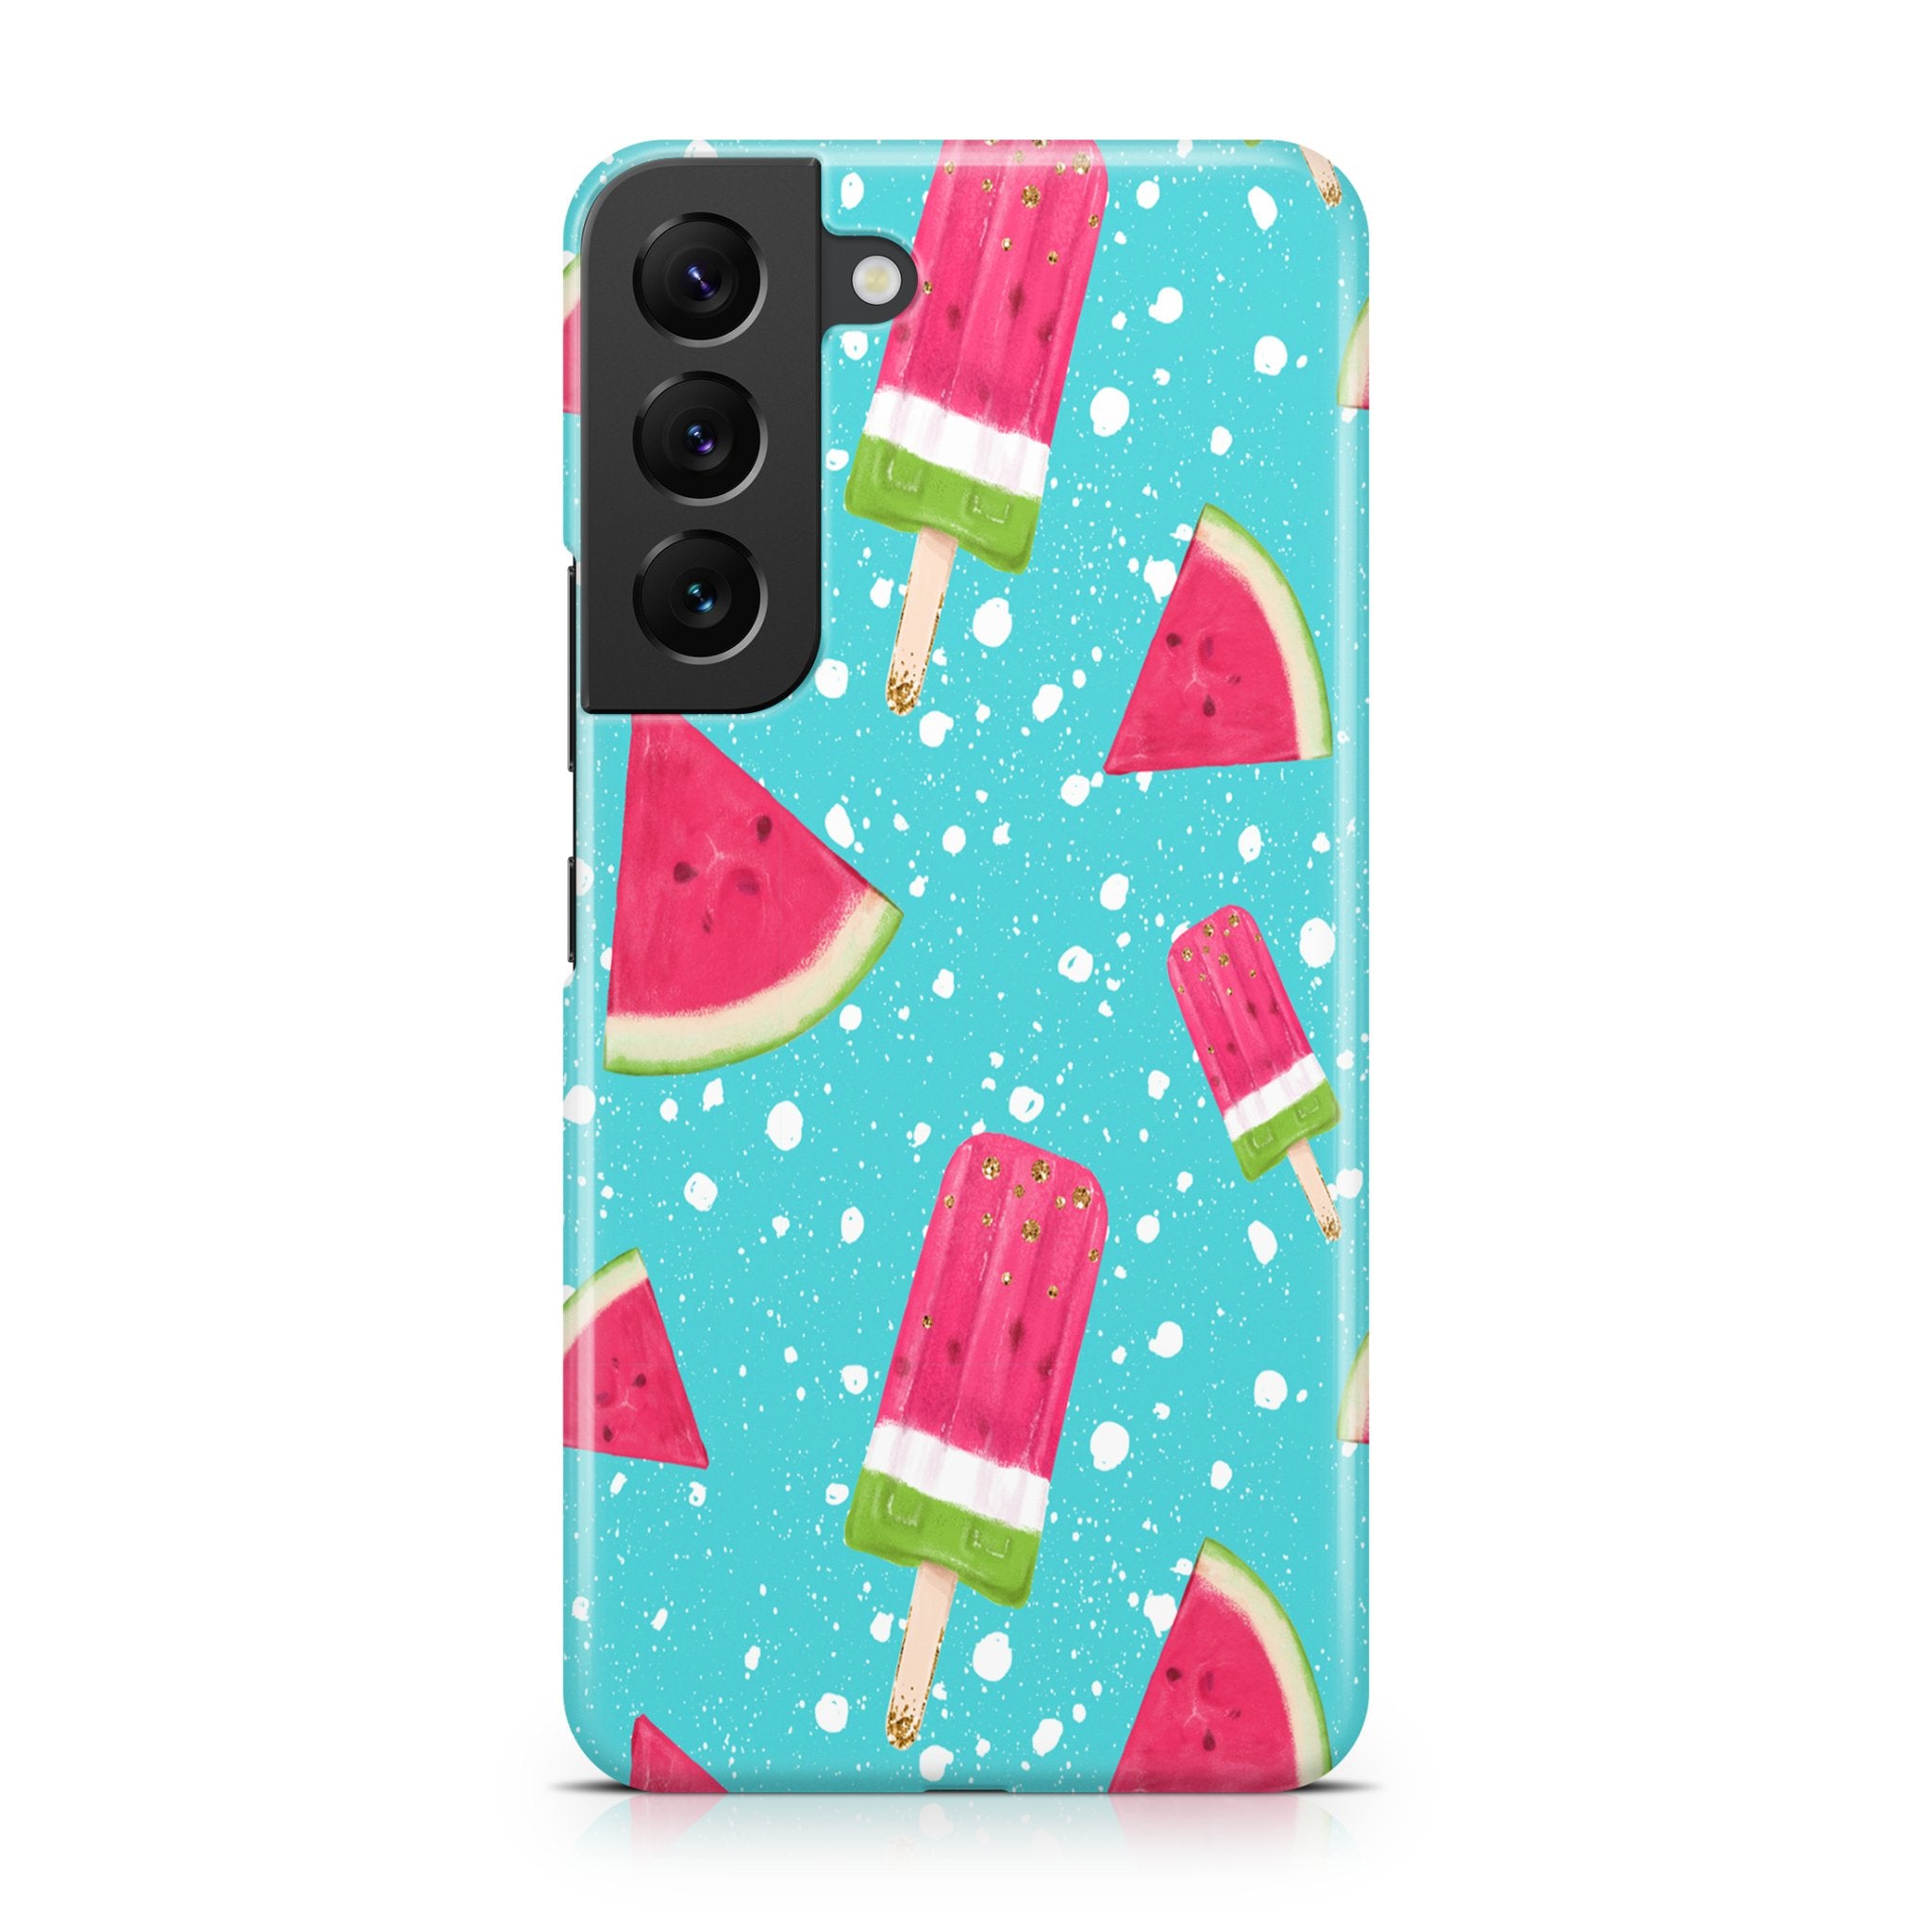 Watermelon Popsicle - Samsung phone case designs by CaseSwagger